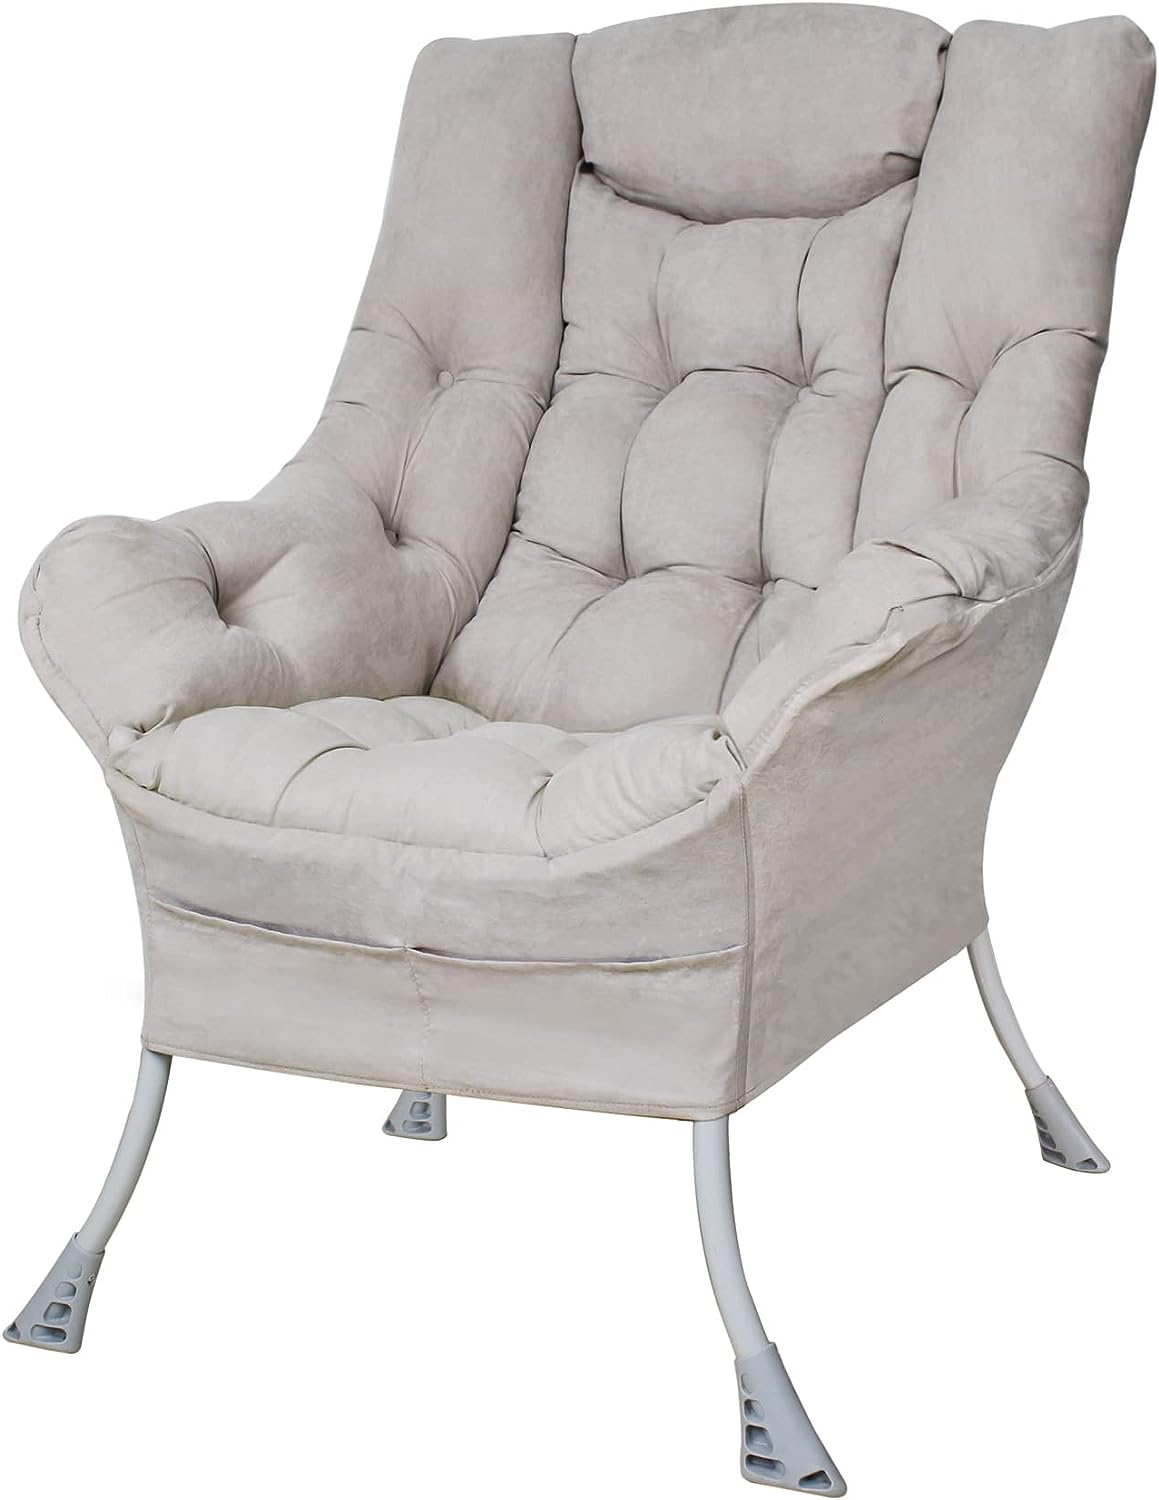 Explore Land Living Room Single High Back Lazy Chair [...]